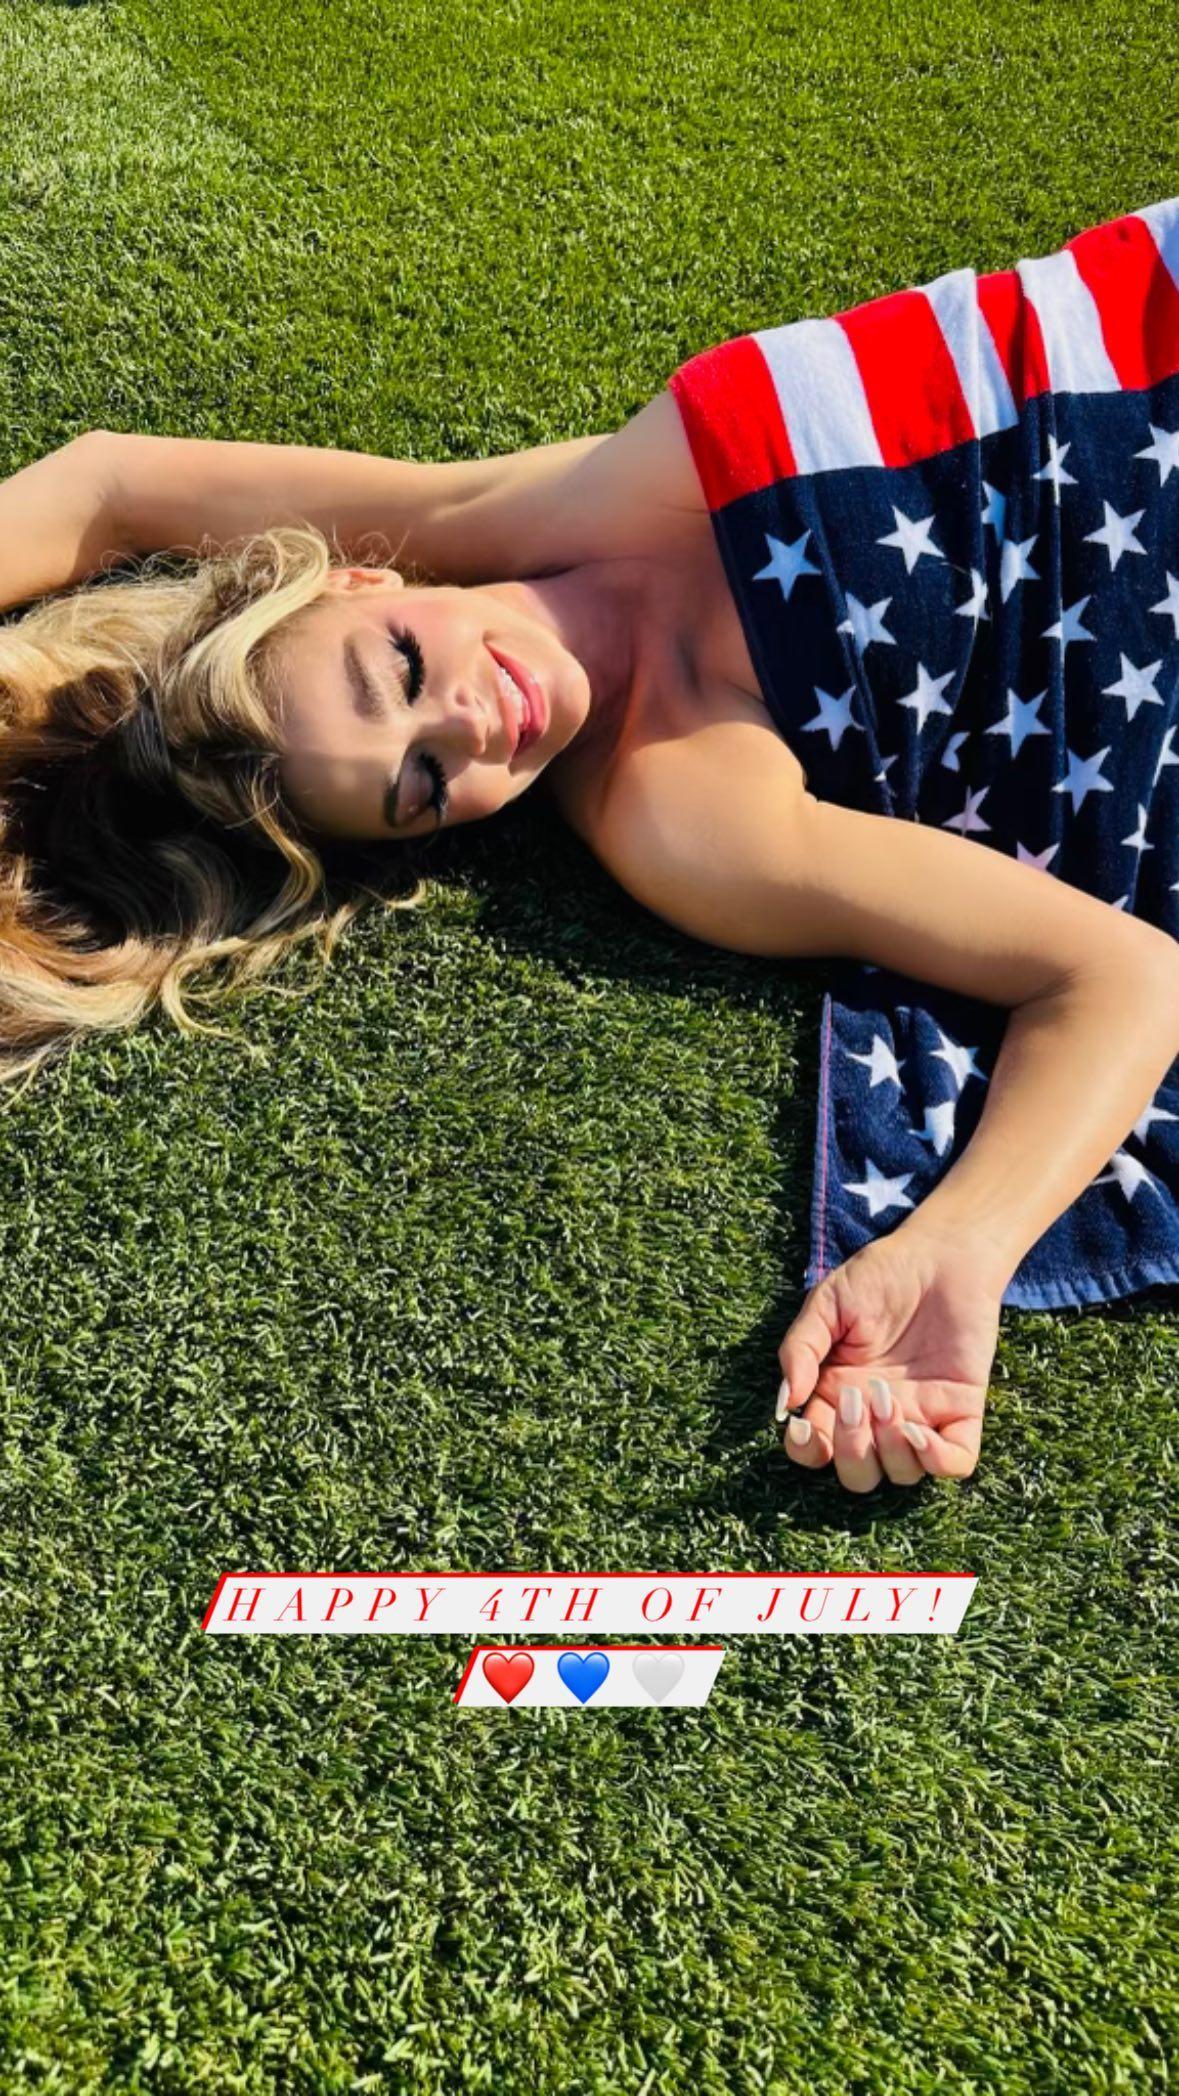 Denise Richards Wears Nothing But An American Flag For The Fourth Of July